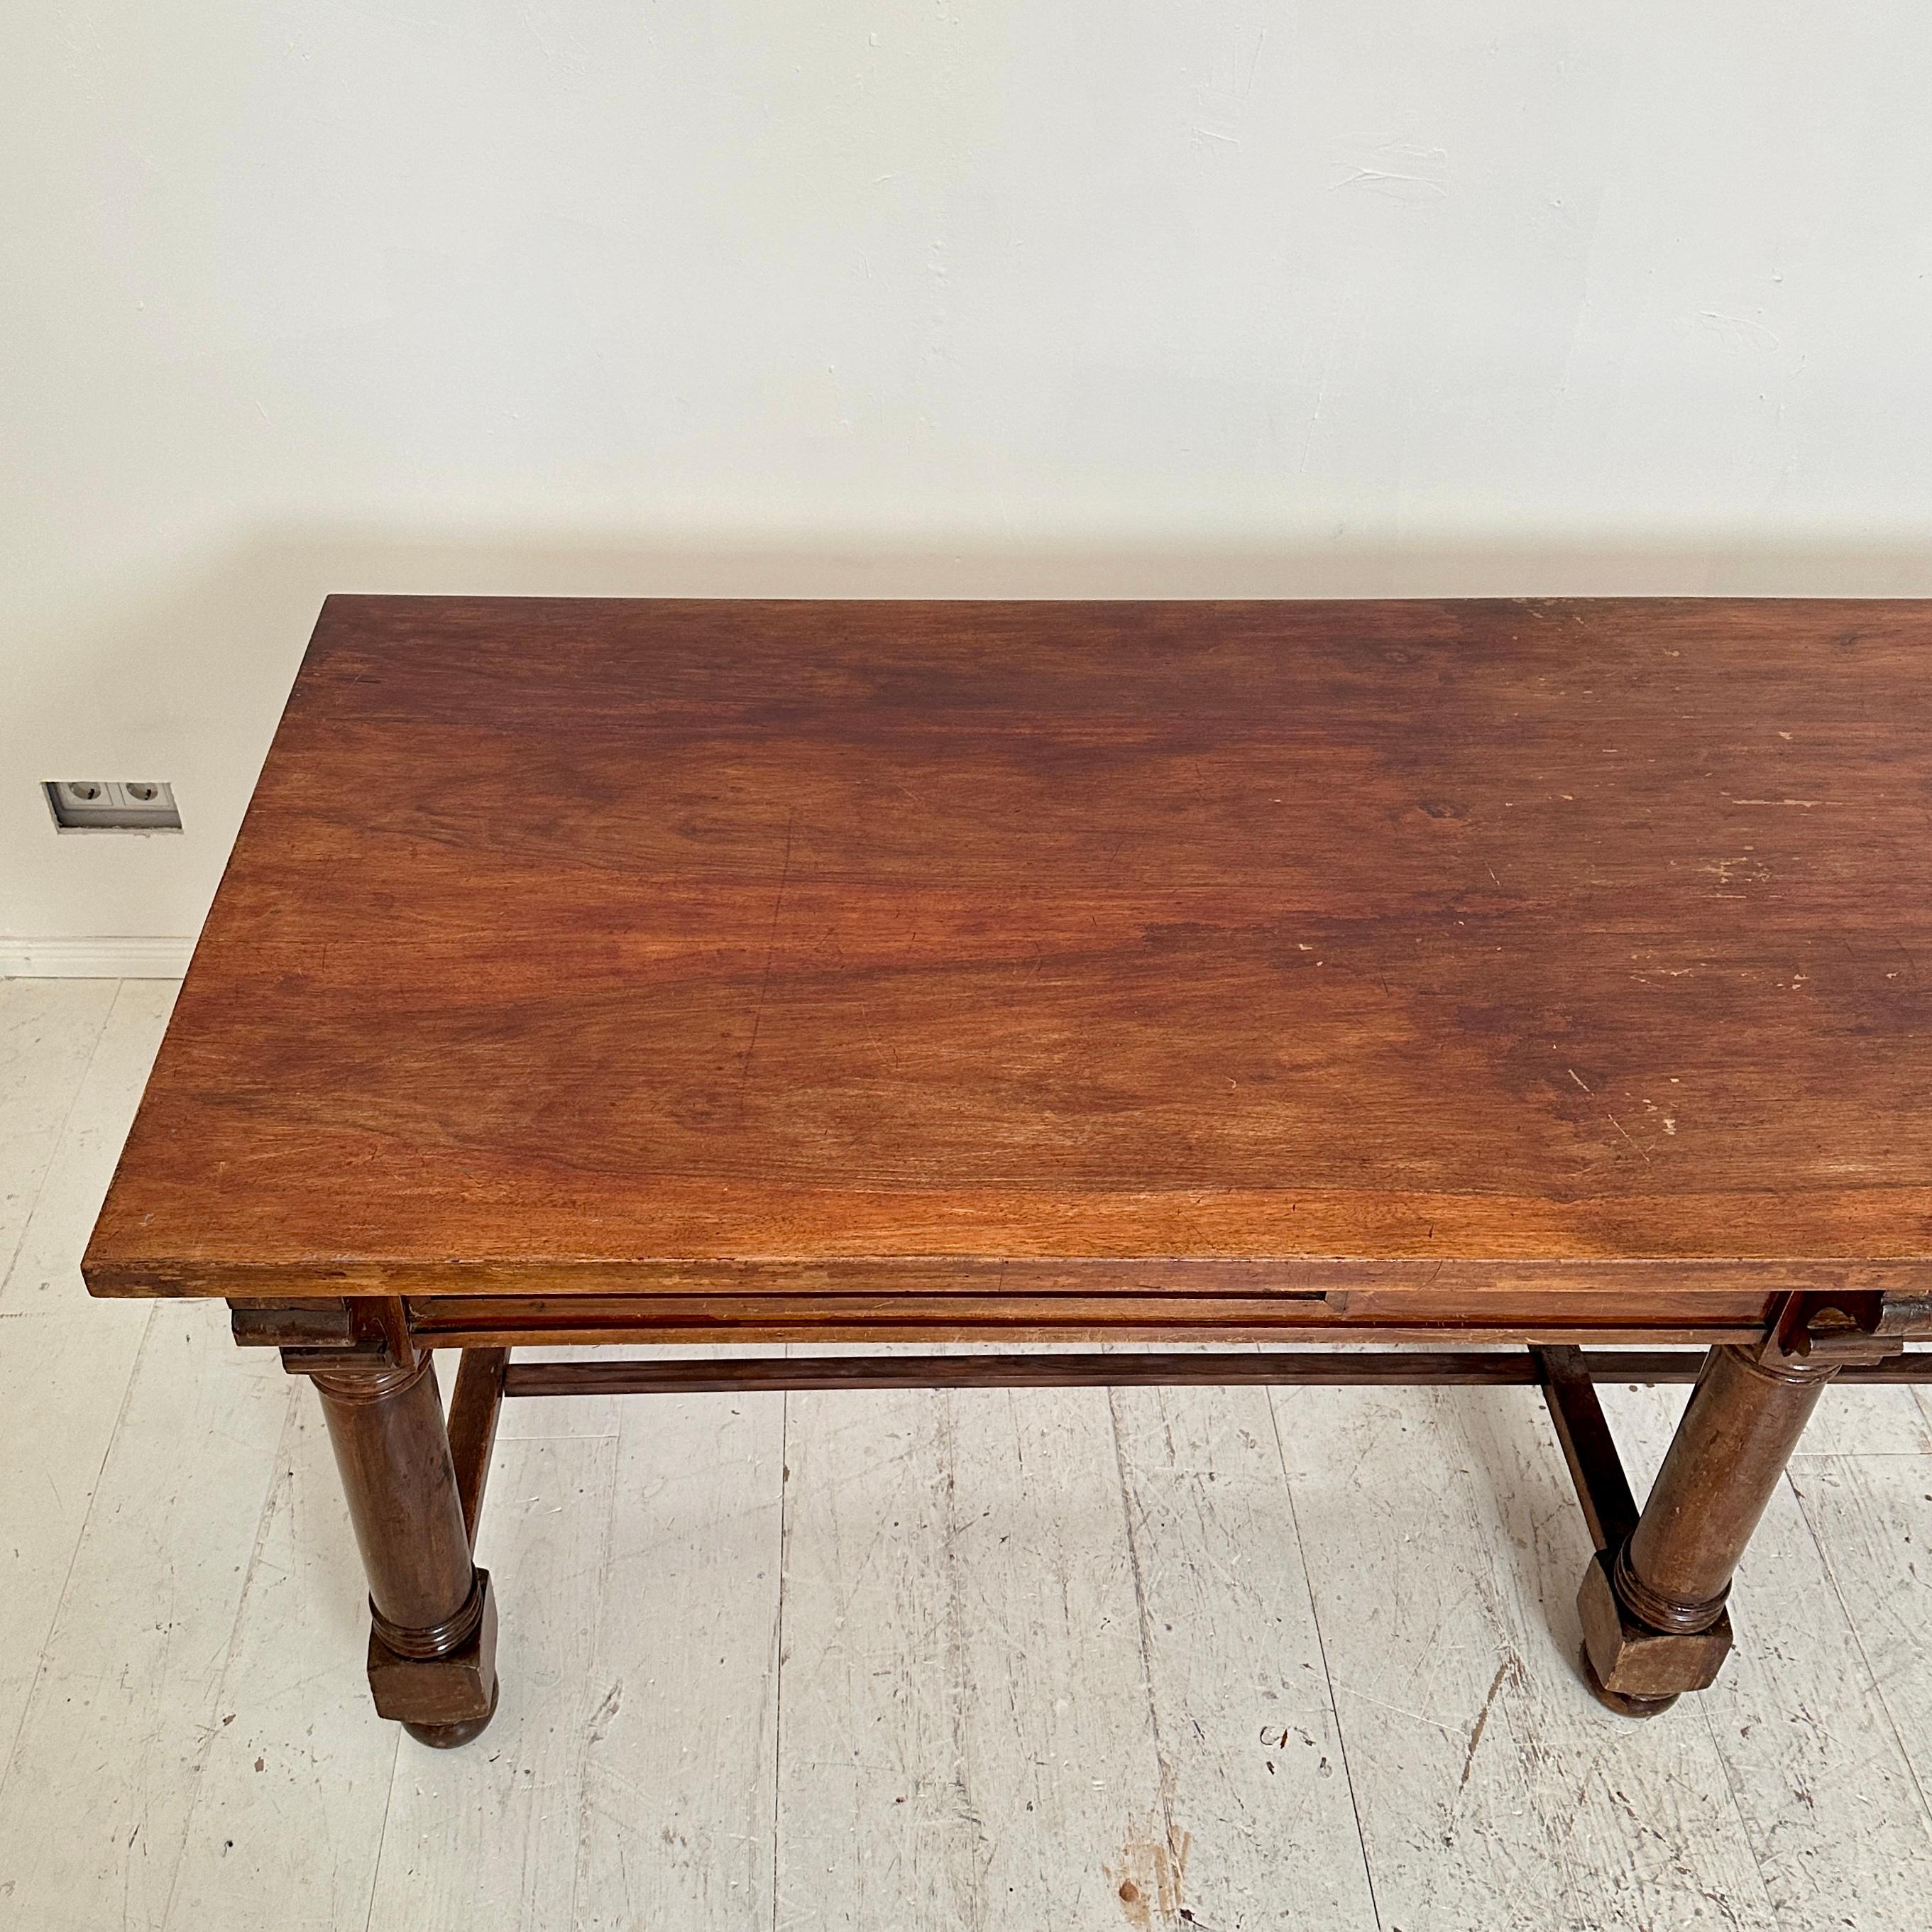 Late 19th Century Italian Large Brown Walnut Dining Table with 2 Drawers, 1880 For Sale 2